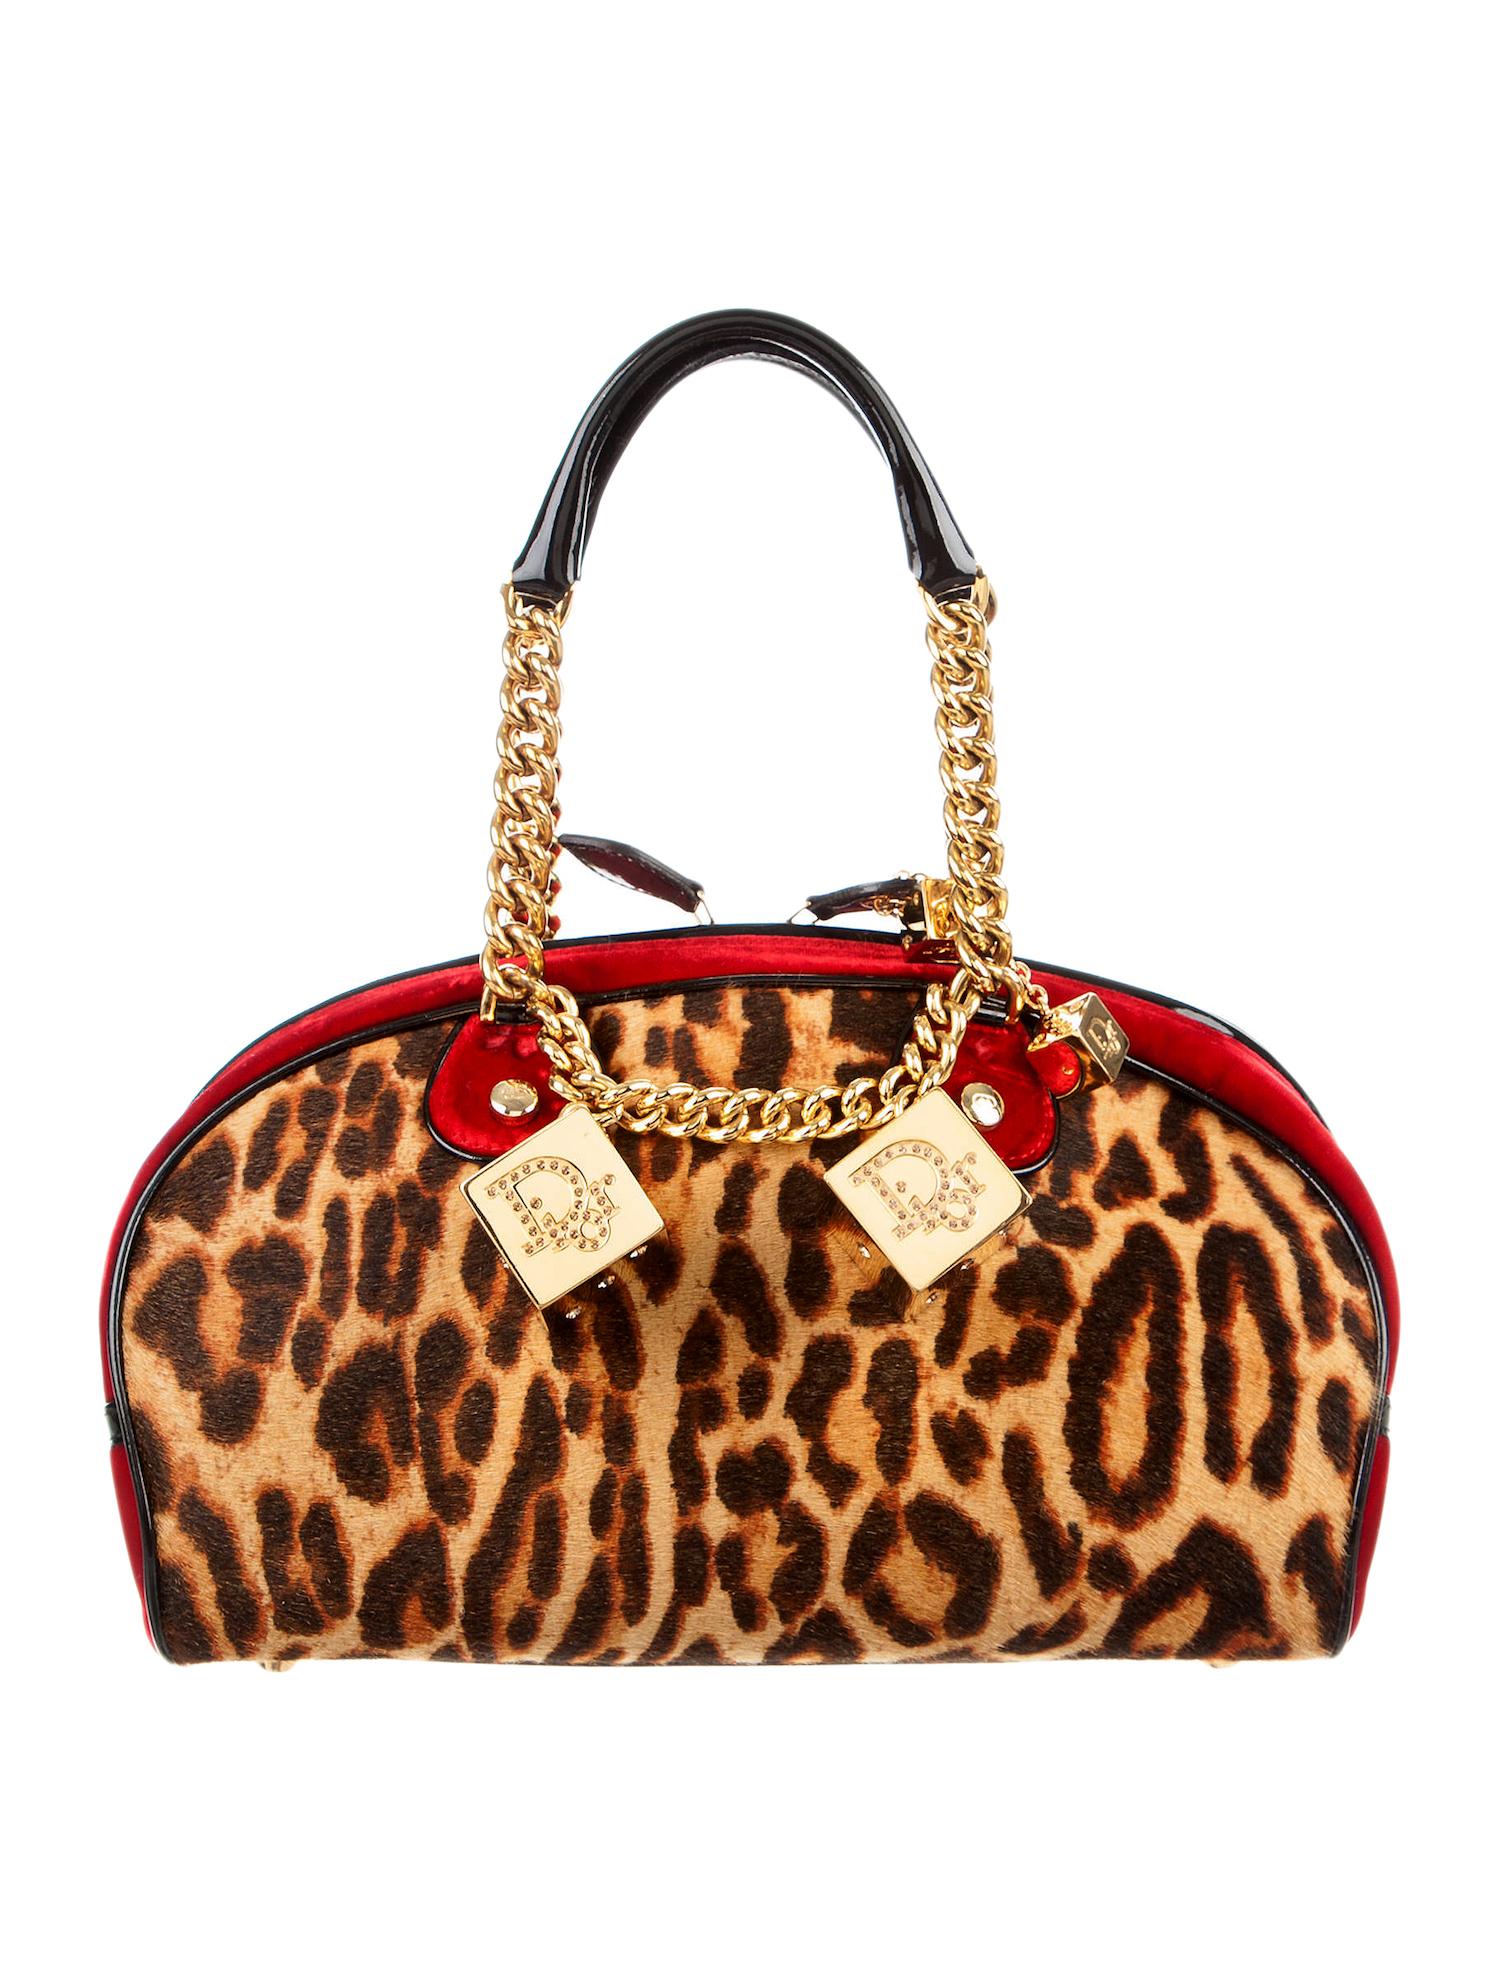 Vintage John Galliano for Christian Dior leopard and red velvet Gambler hand bag with giant gold tone & rhinestone 